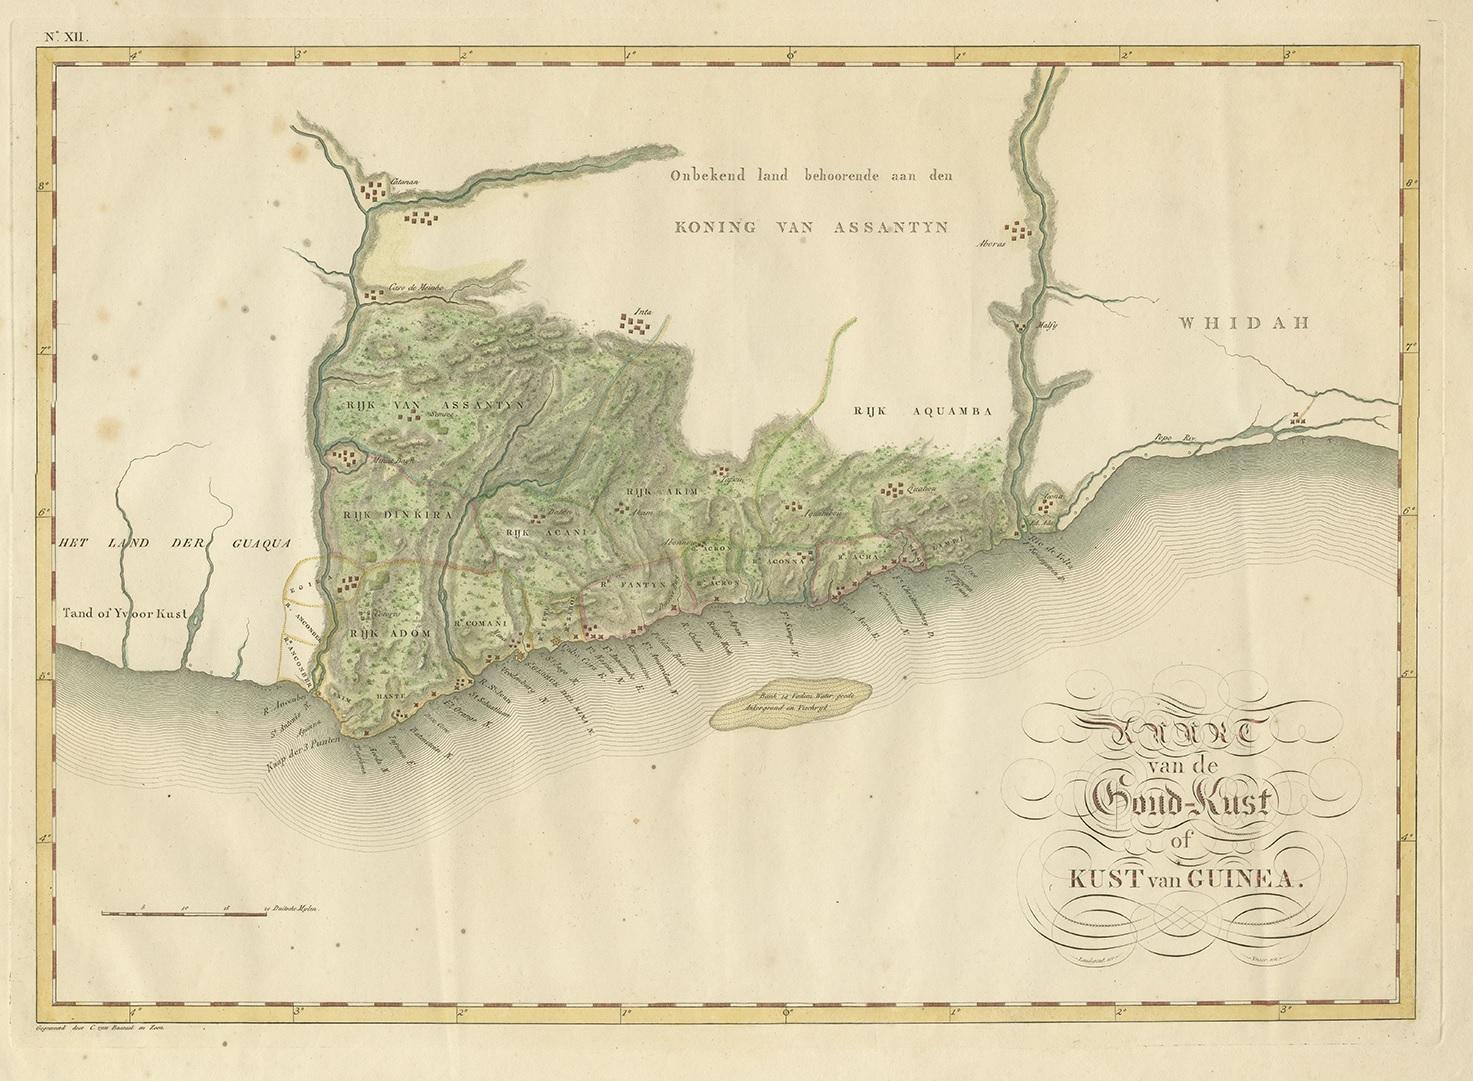 Antique map titled 'Kaart van de Goud-Kust of Kust van Guina'. A rare and attractive early 19th century Dutch map of the Dutch Gold Coast. The Dutch Gold Coast or Dutch Guinea, was a portion of contemporary Ghana that was gradually colonized by the